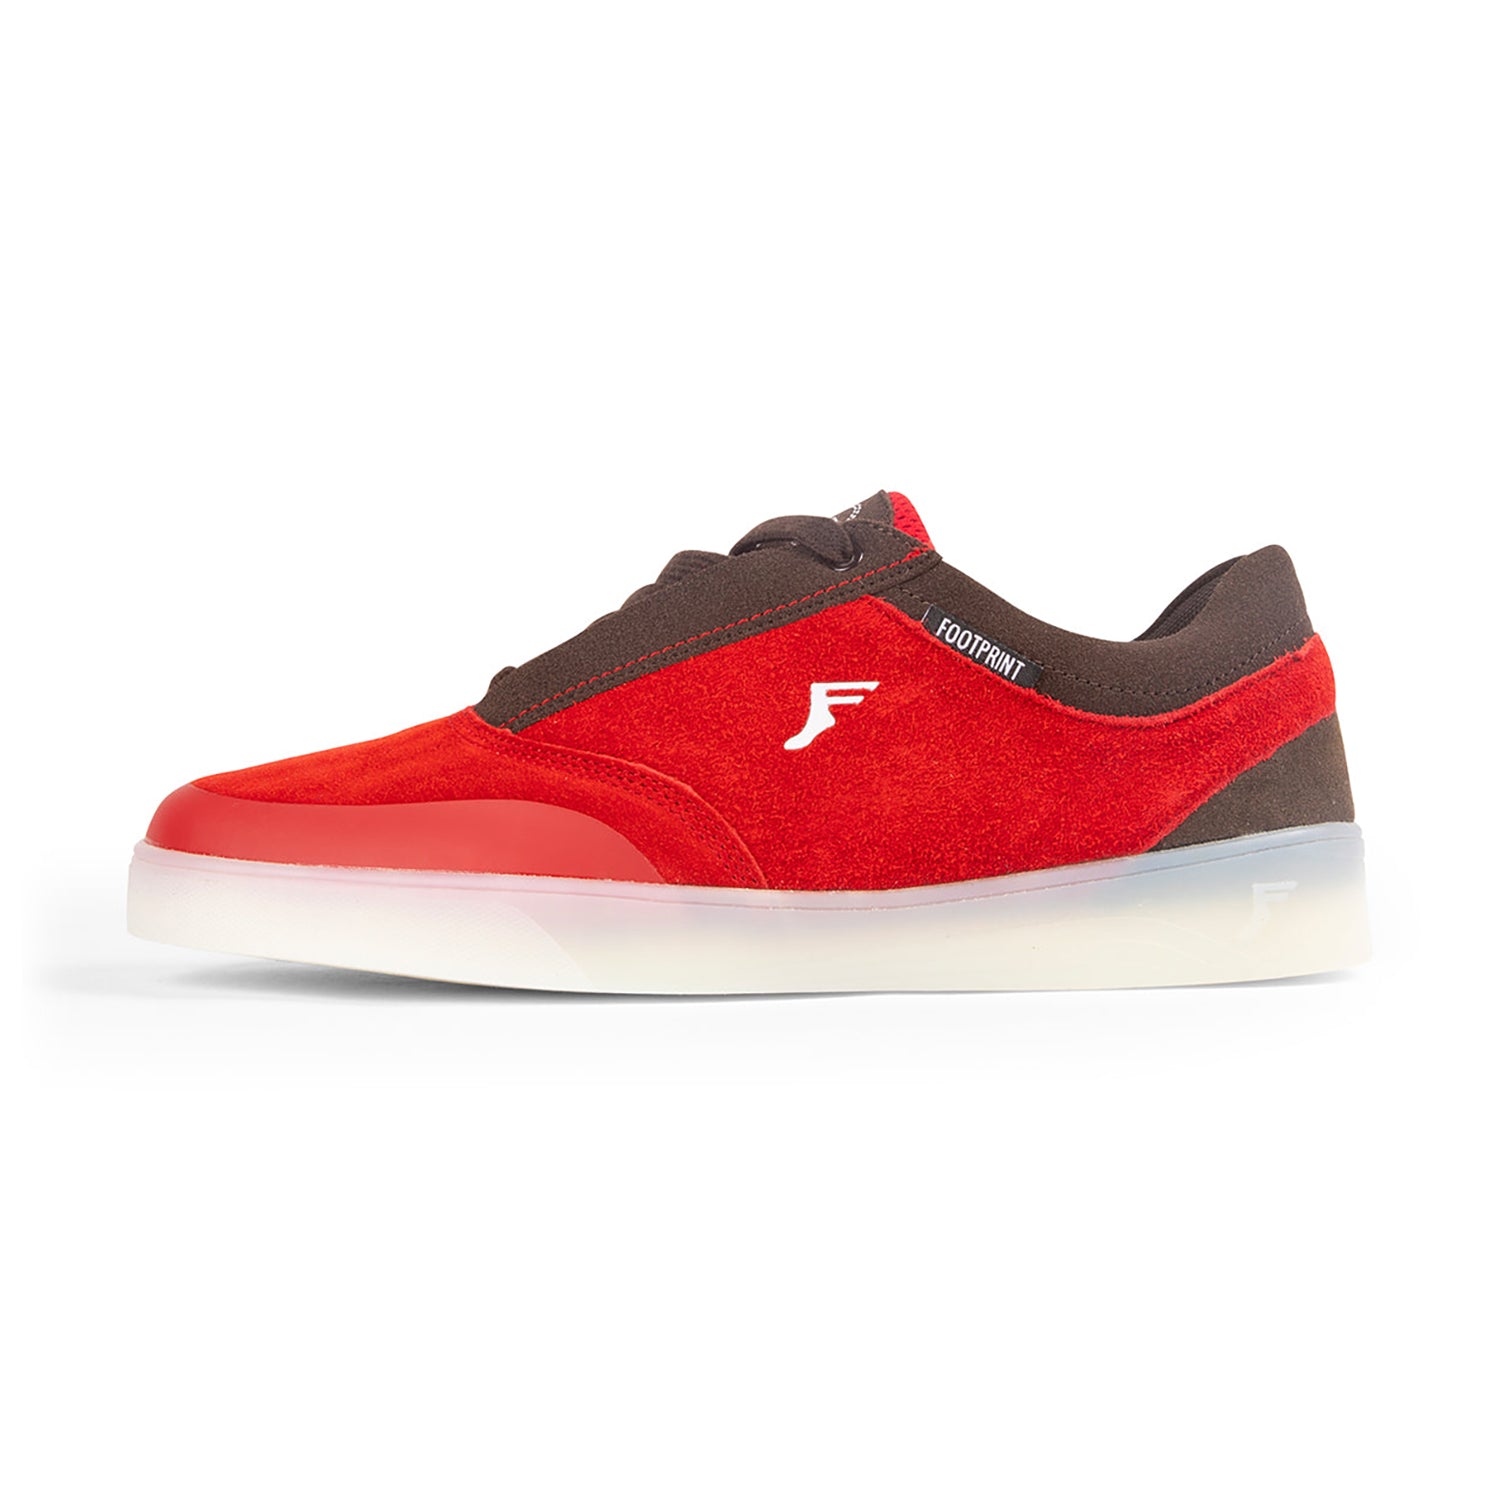 red suede shoes fp footprint